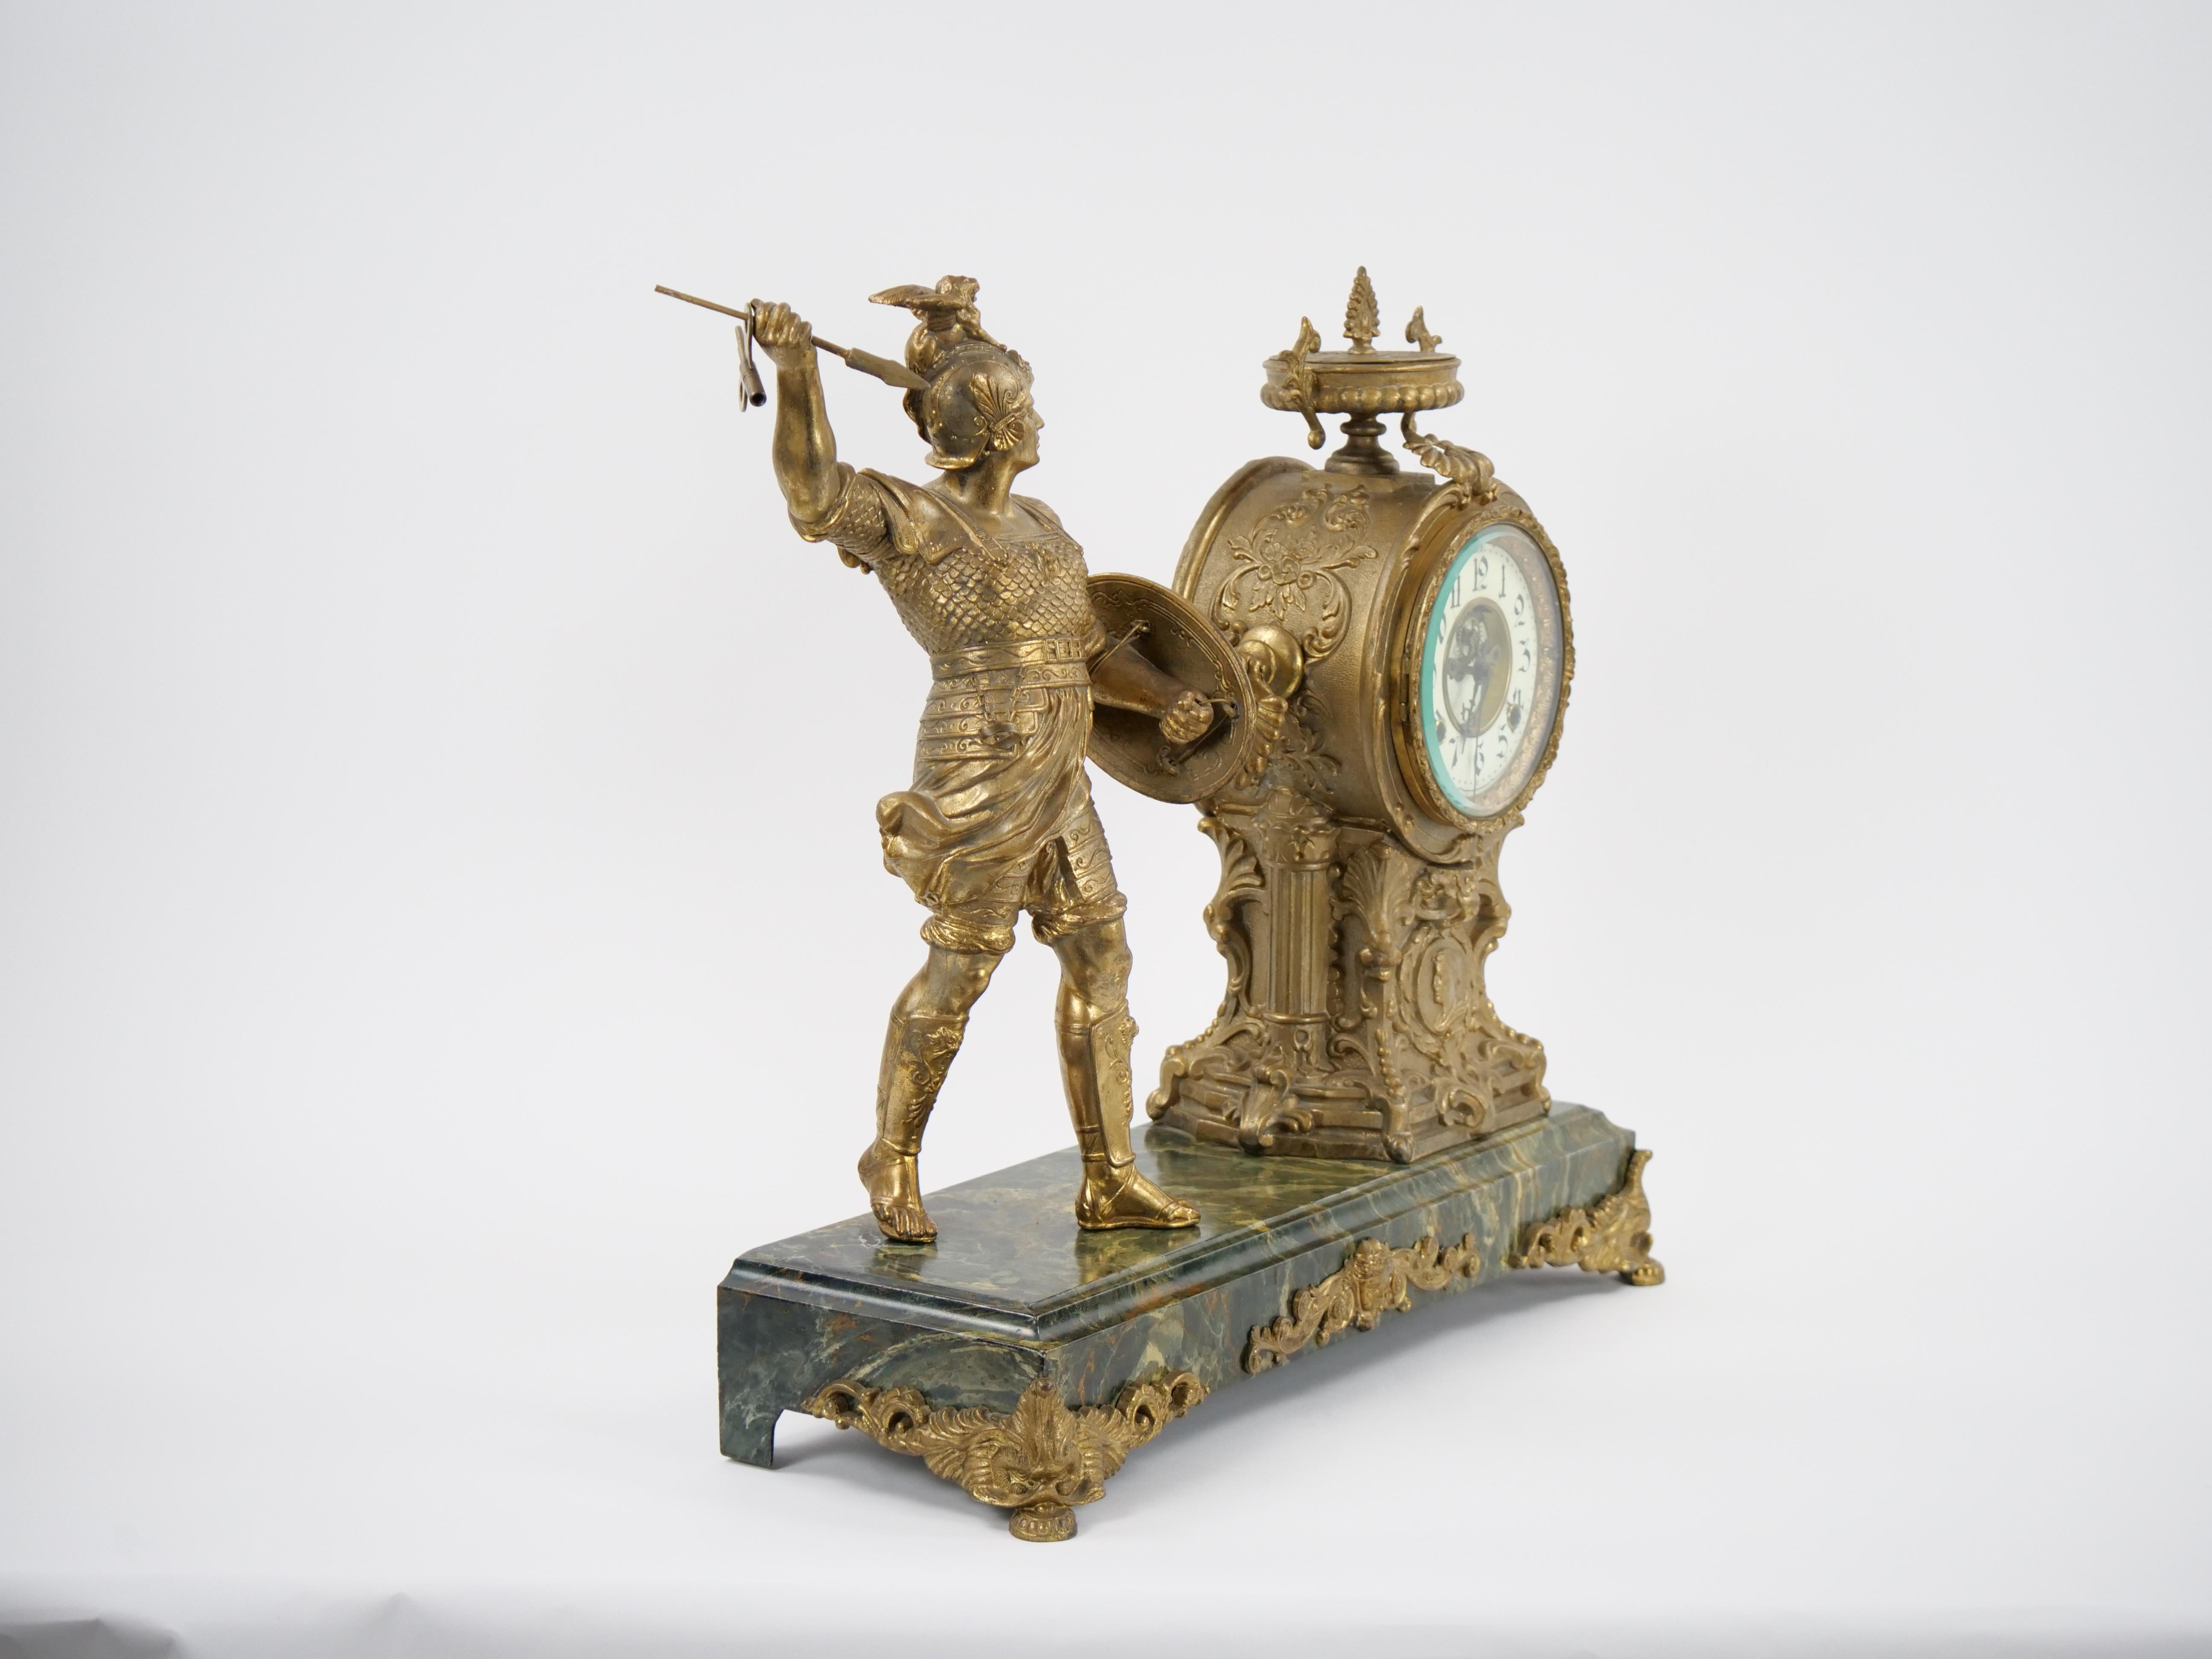  Gilt Bronze Footed Marble Base Mantel Clock Depicting Carthage Warrior For Sale 4